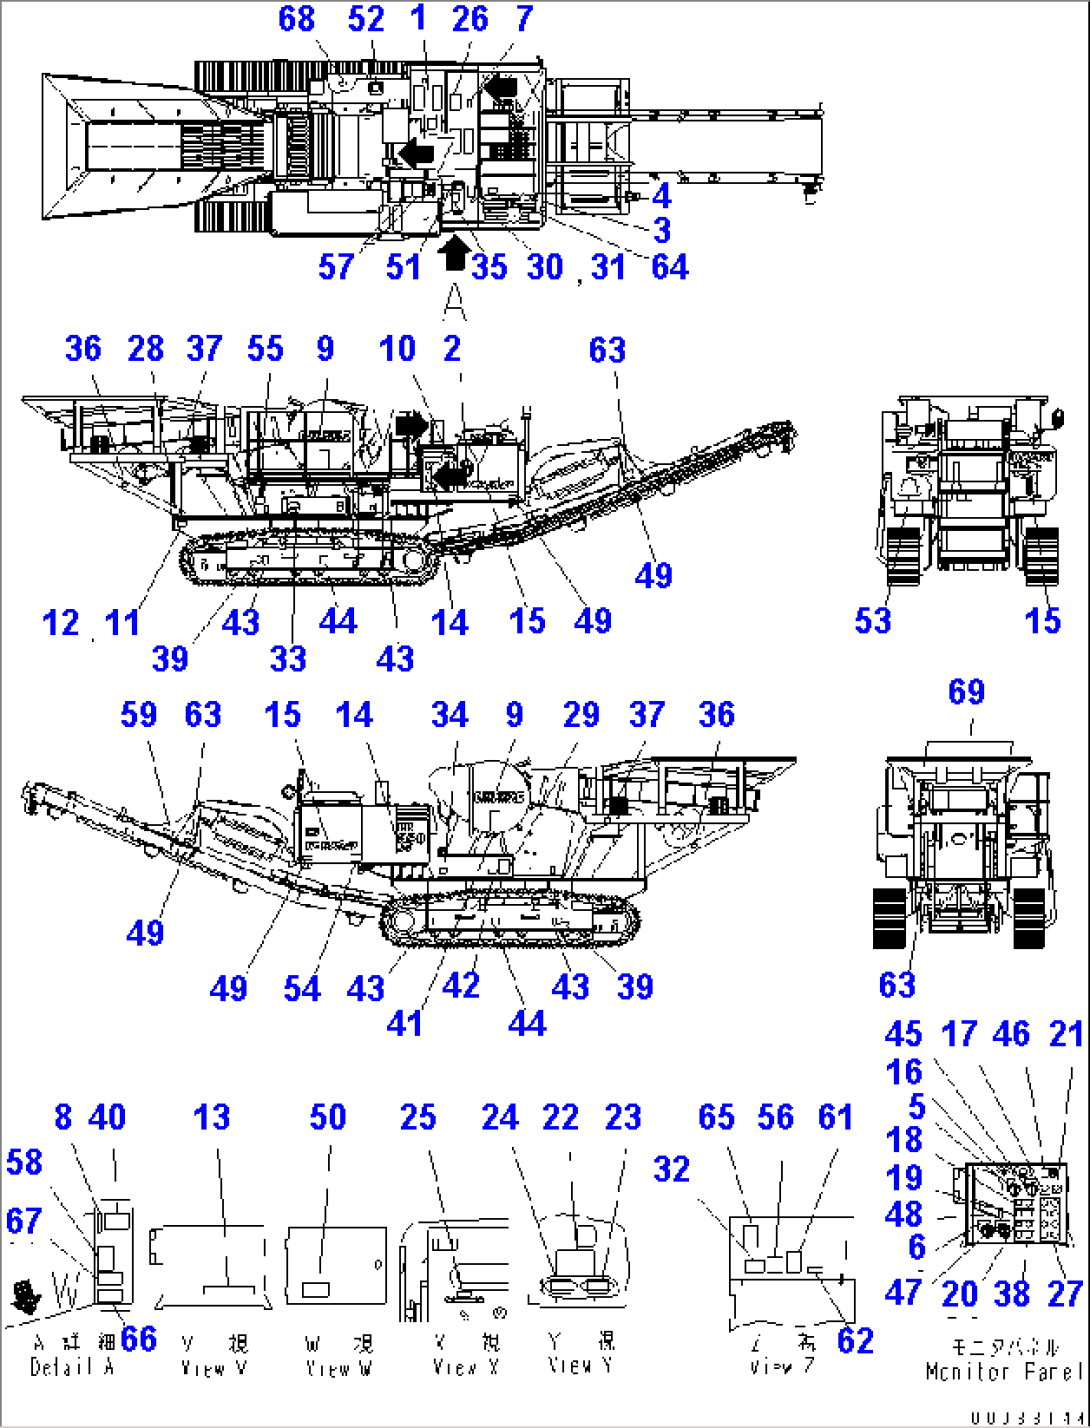 MARKS AND PLATES (GERMAN)(#1501-)